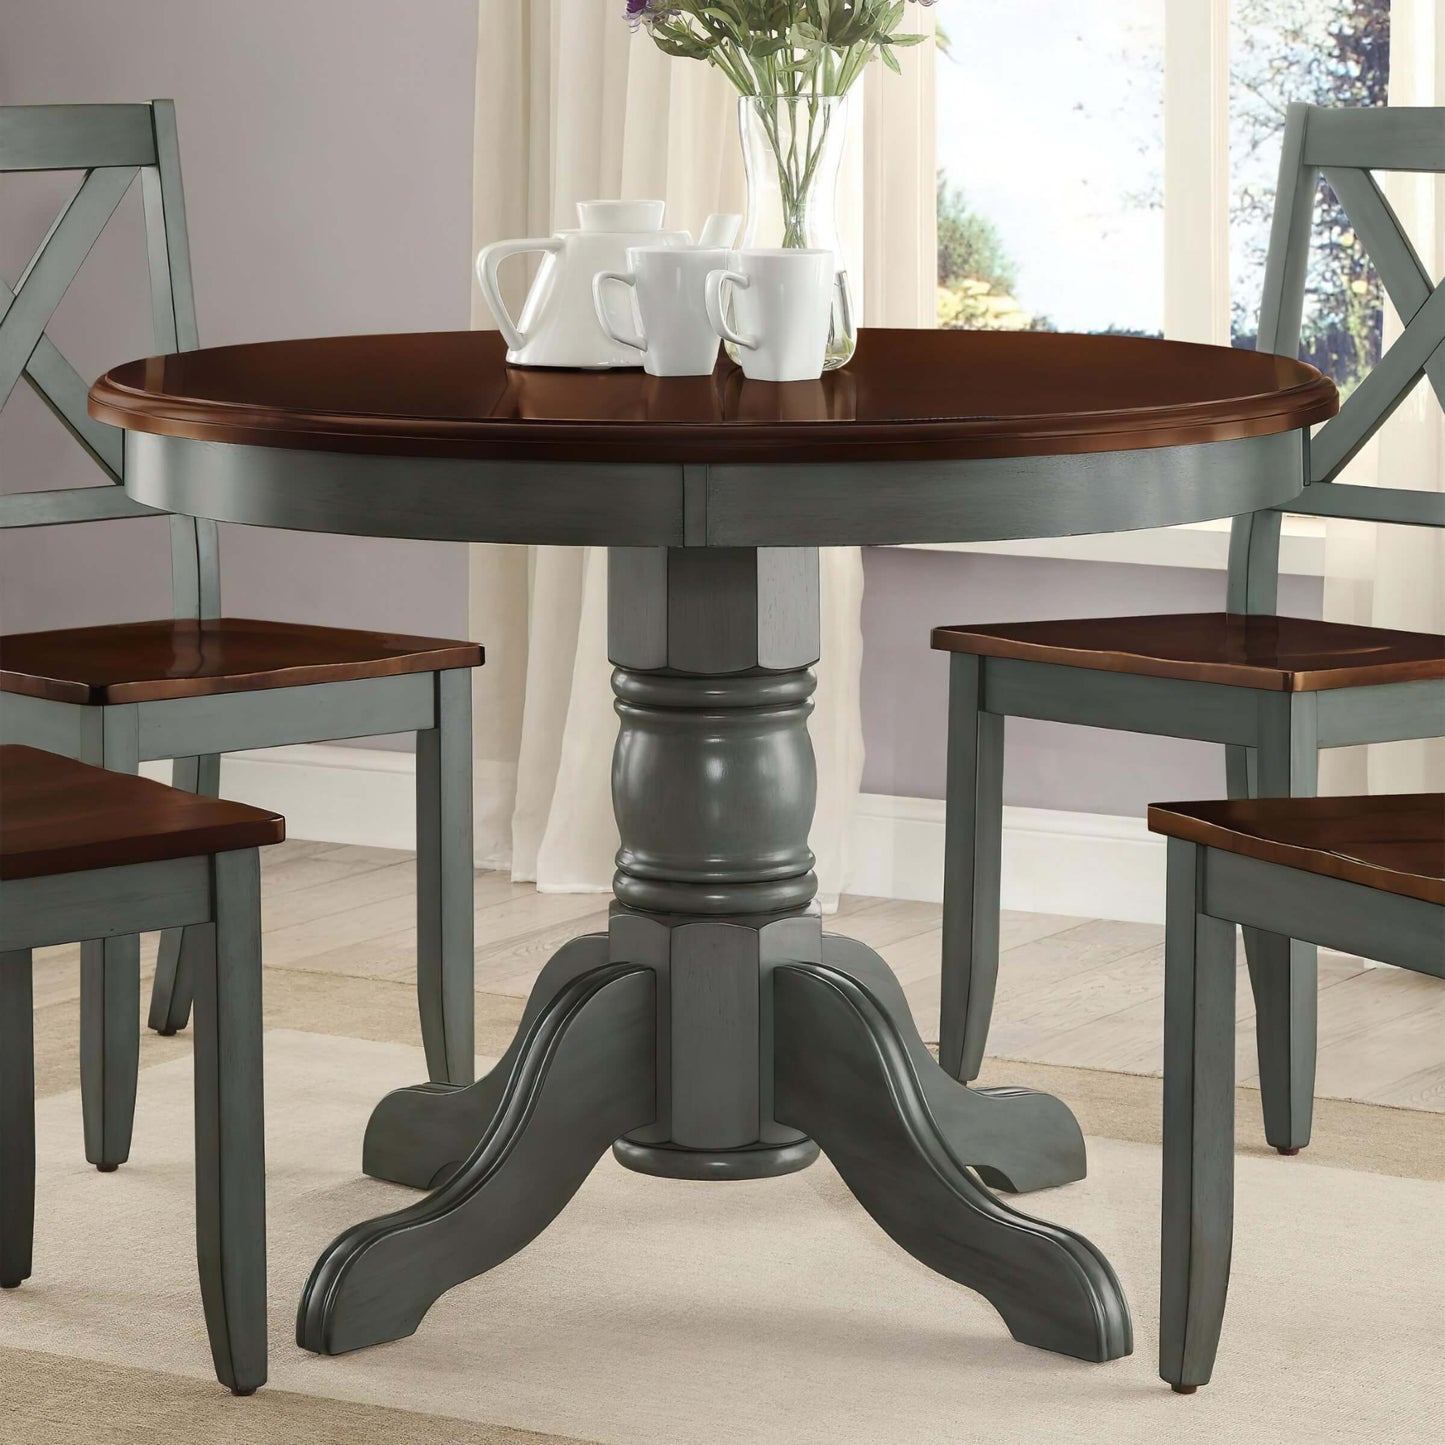 Alluring Natural Solid Wood Round Dining Room Table Set For 4 | Includes Chairs